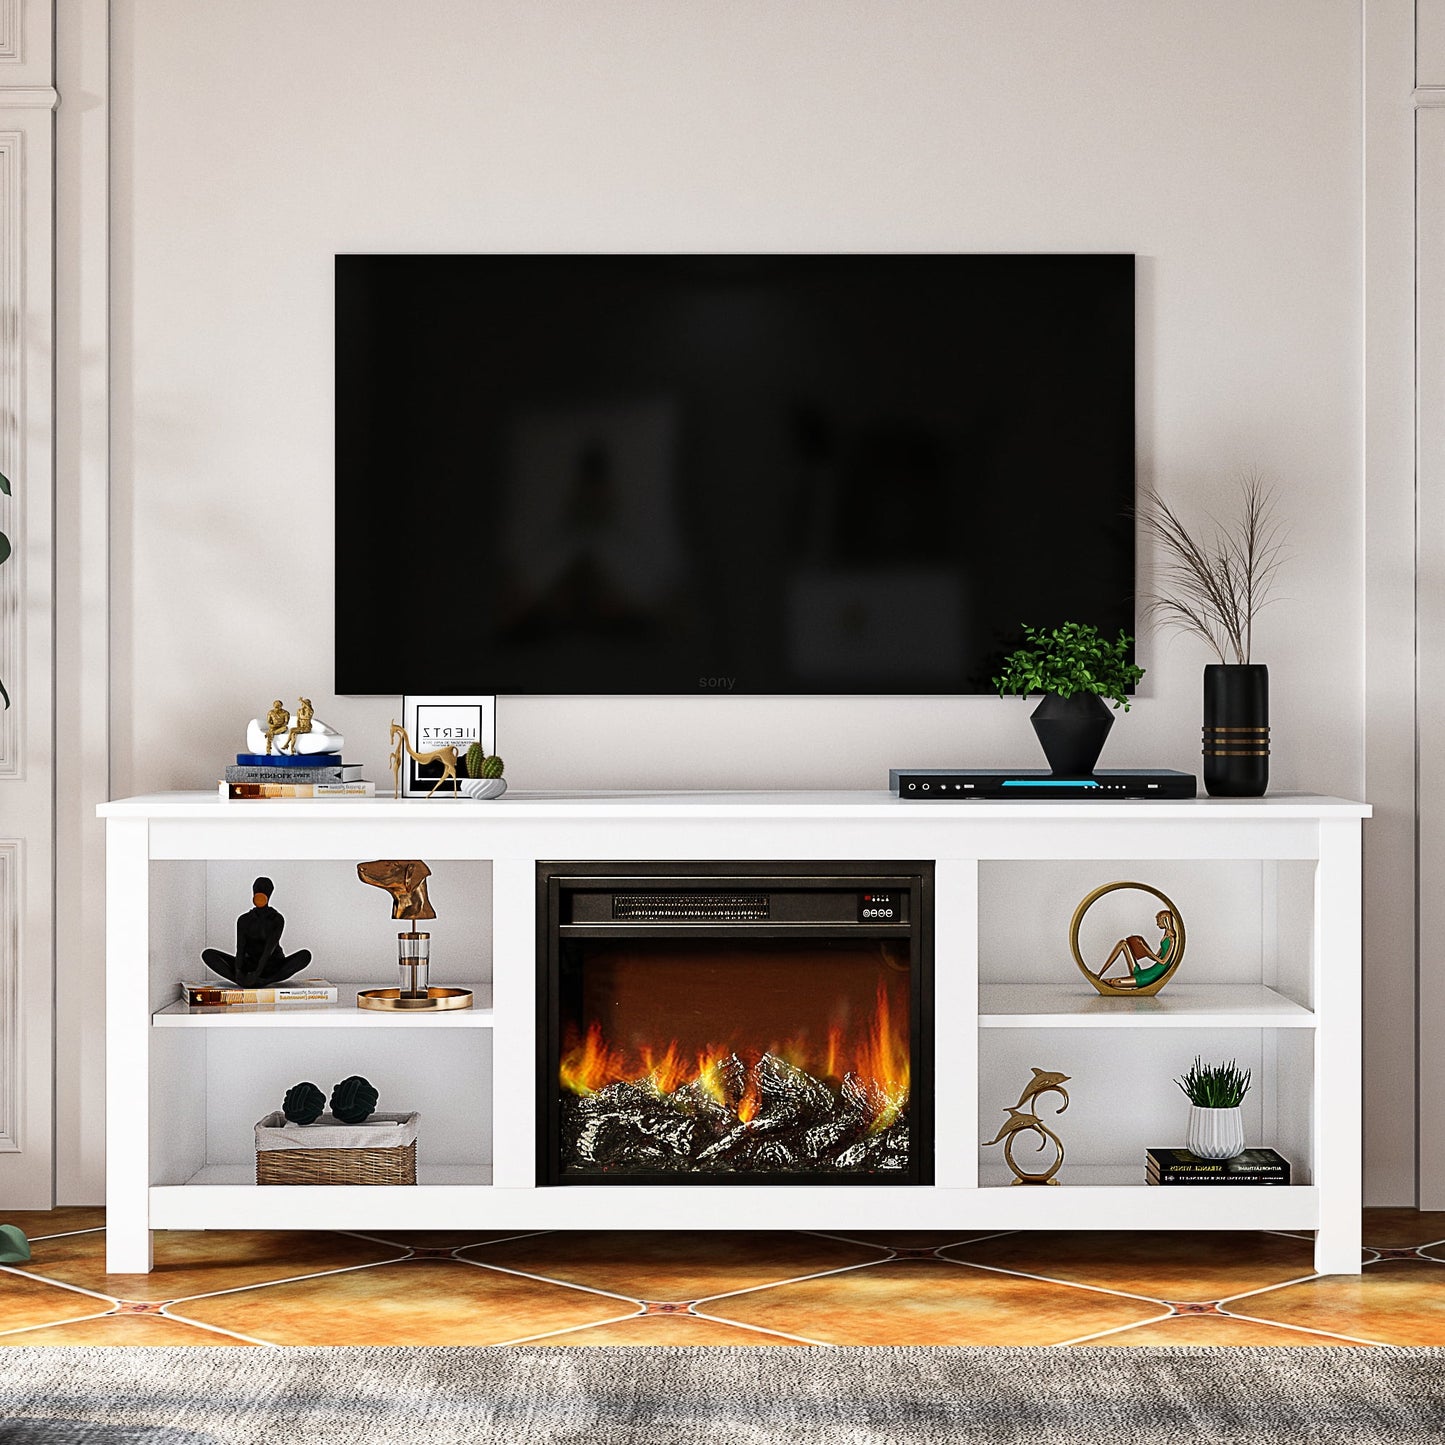 SYNGAR TV Stand with Fireplace, Modern TV Cabinet for TVs up to 65 inch, Electric Fireplace TV Stand with Storage, Entertainment Center Console Table, for Living Room Bedroom, Espresso, D3184